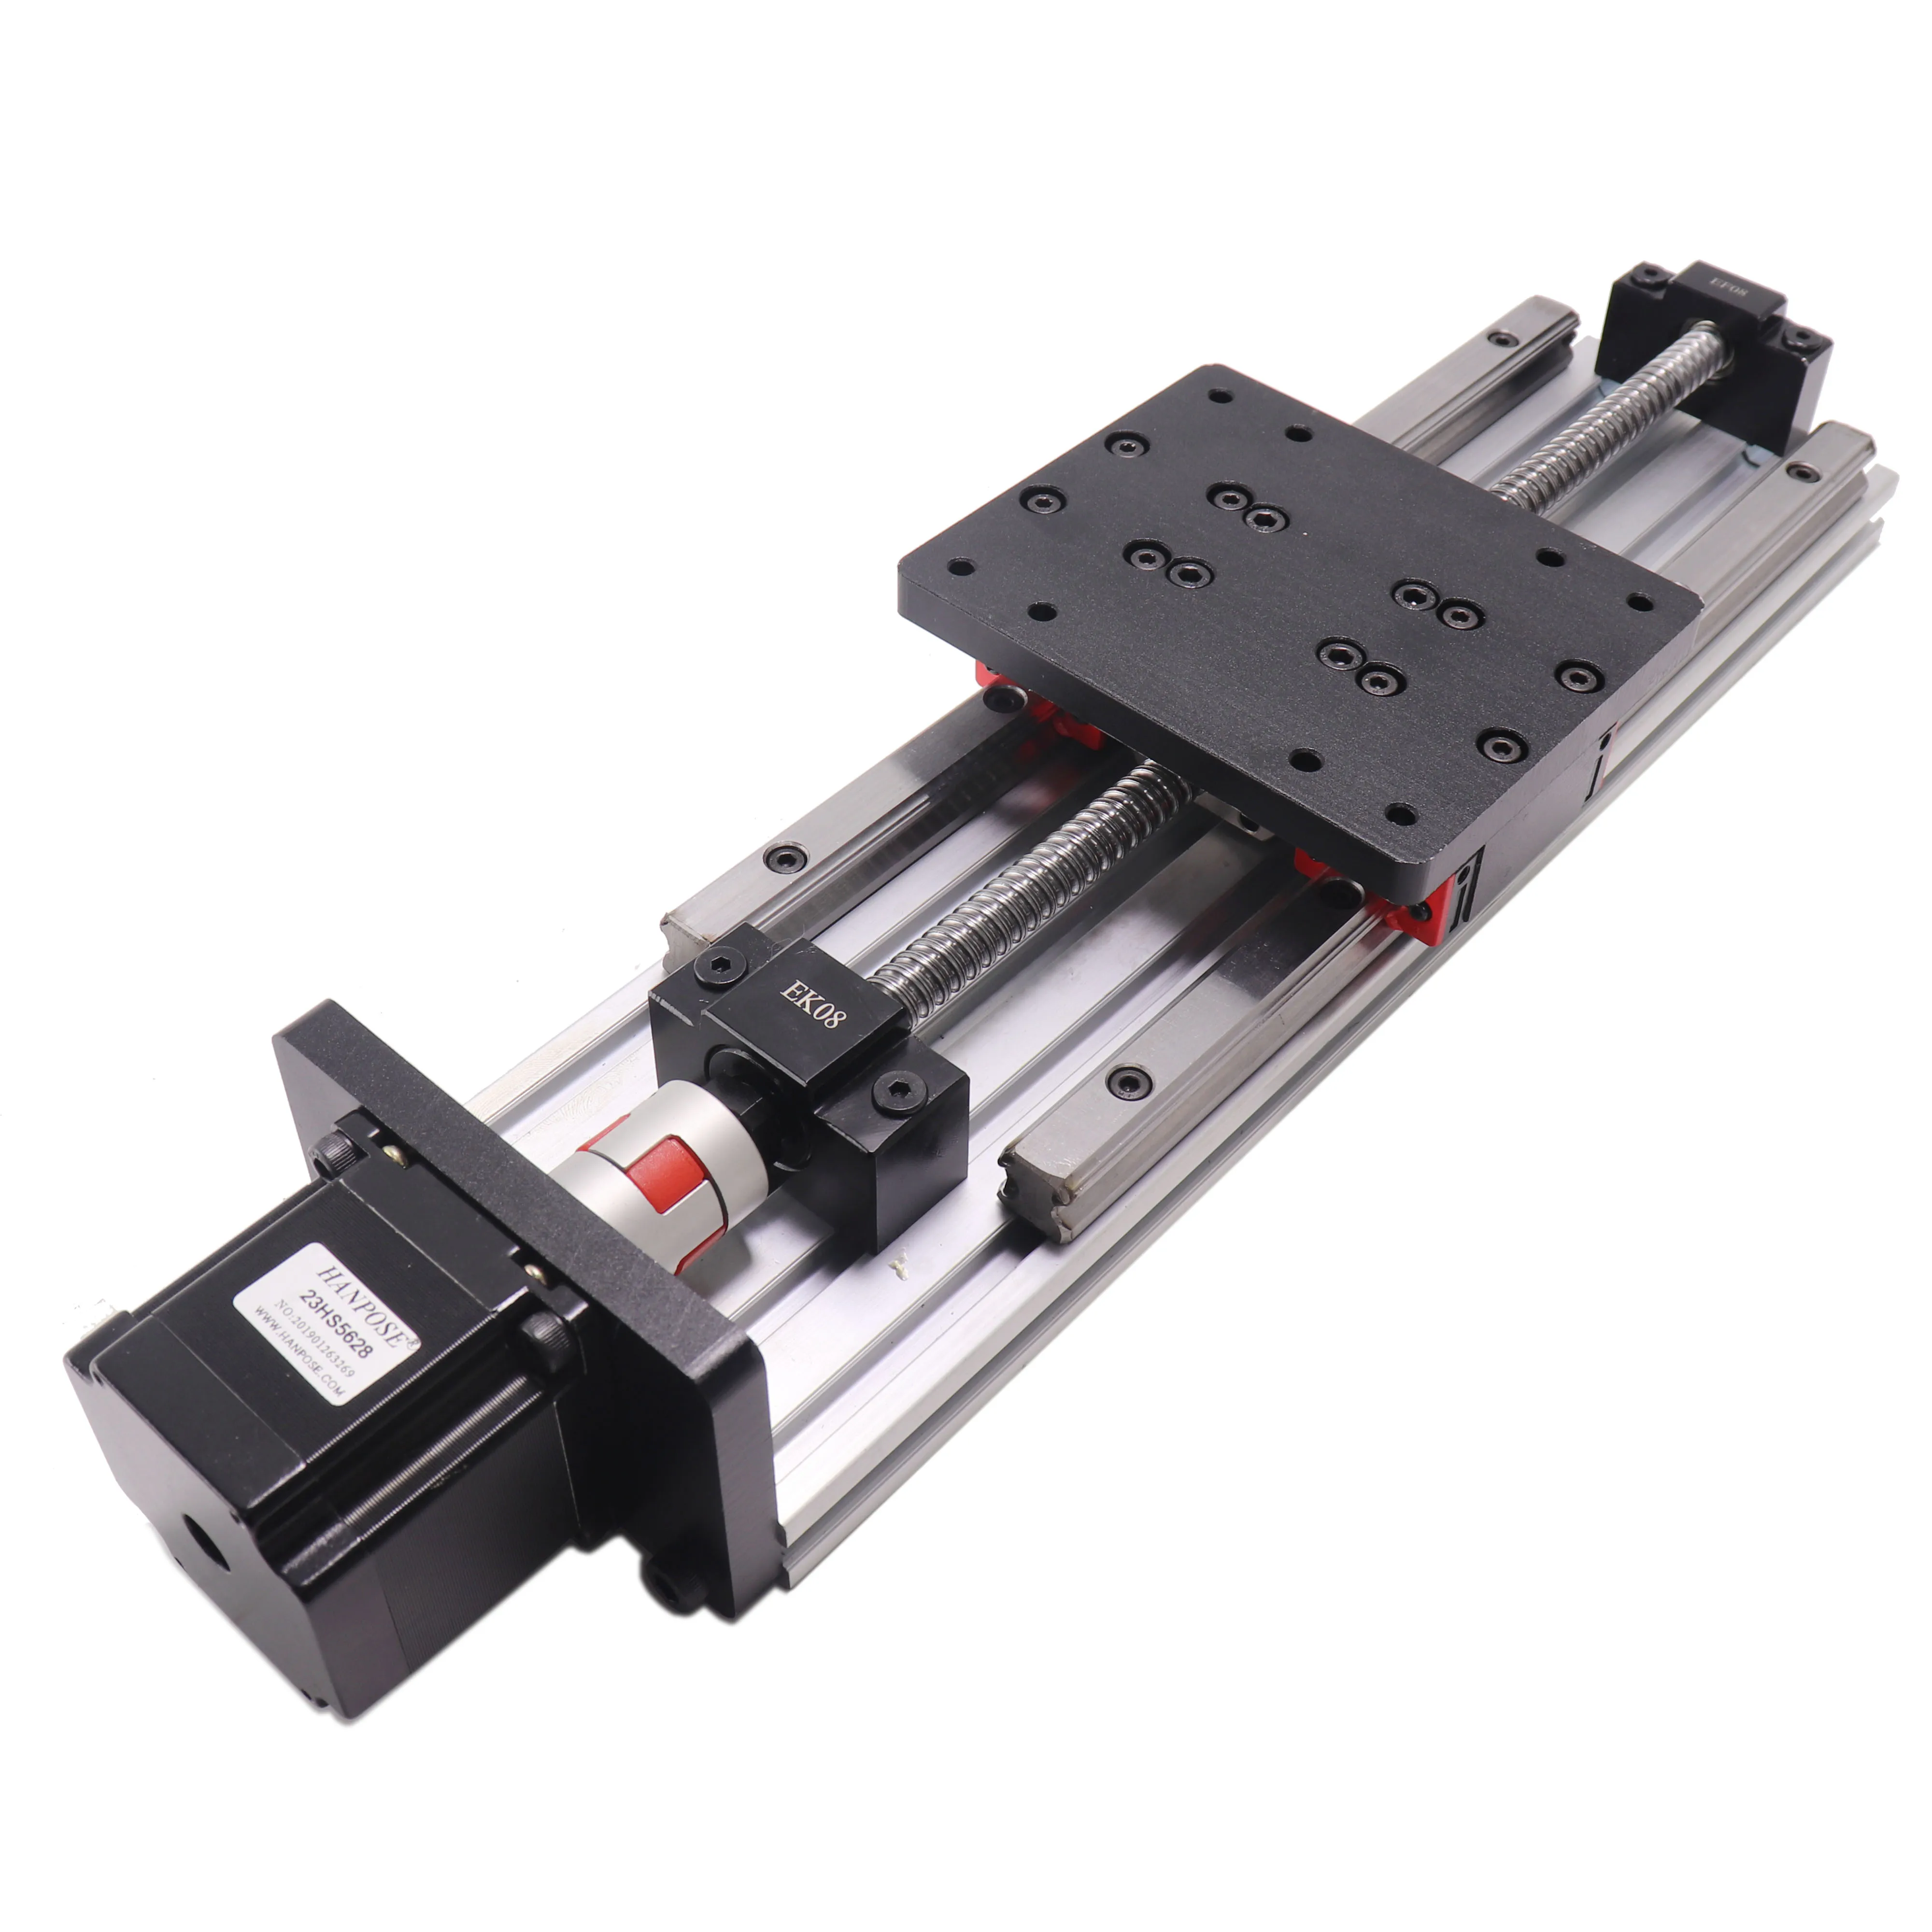 

57 nema motor length 200mm High precision HGR double guide ball screw linear module HPV6 CNC sliding table can be customized